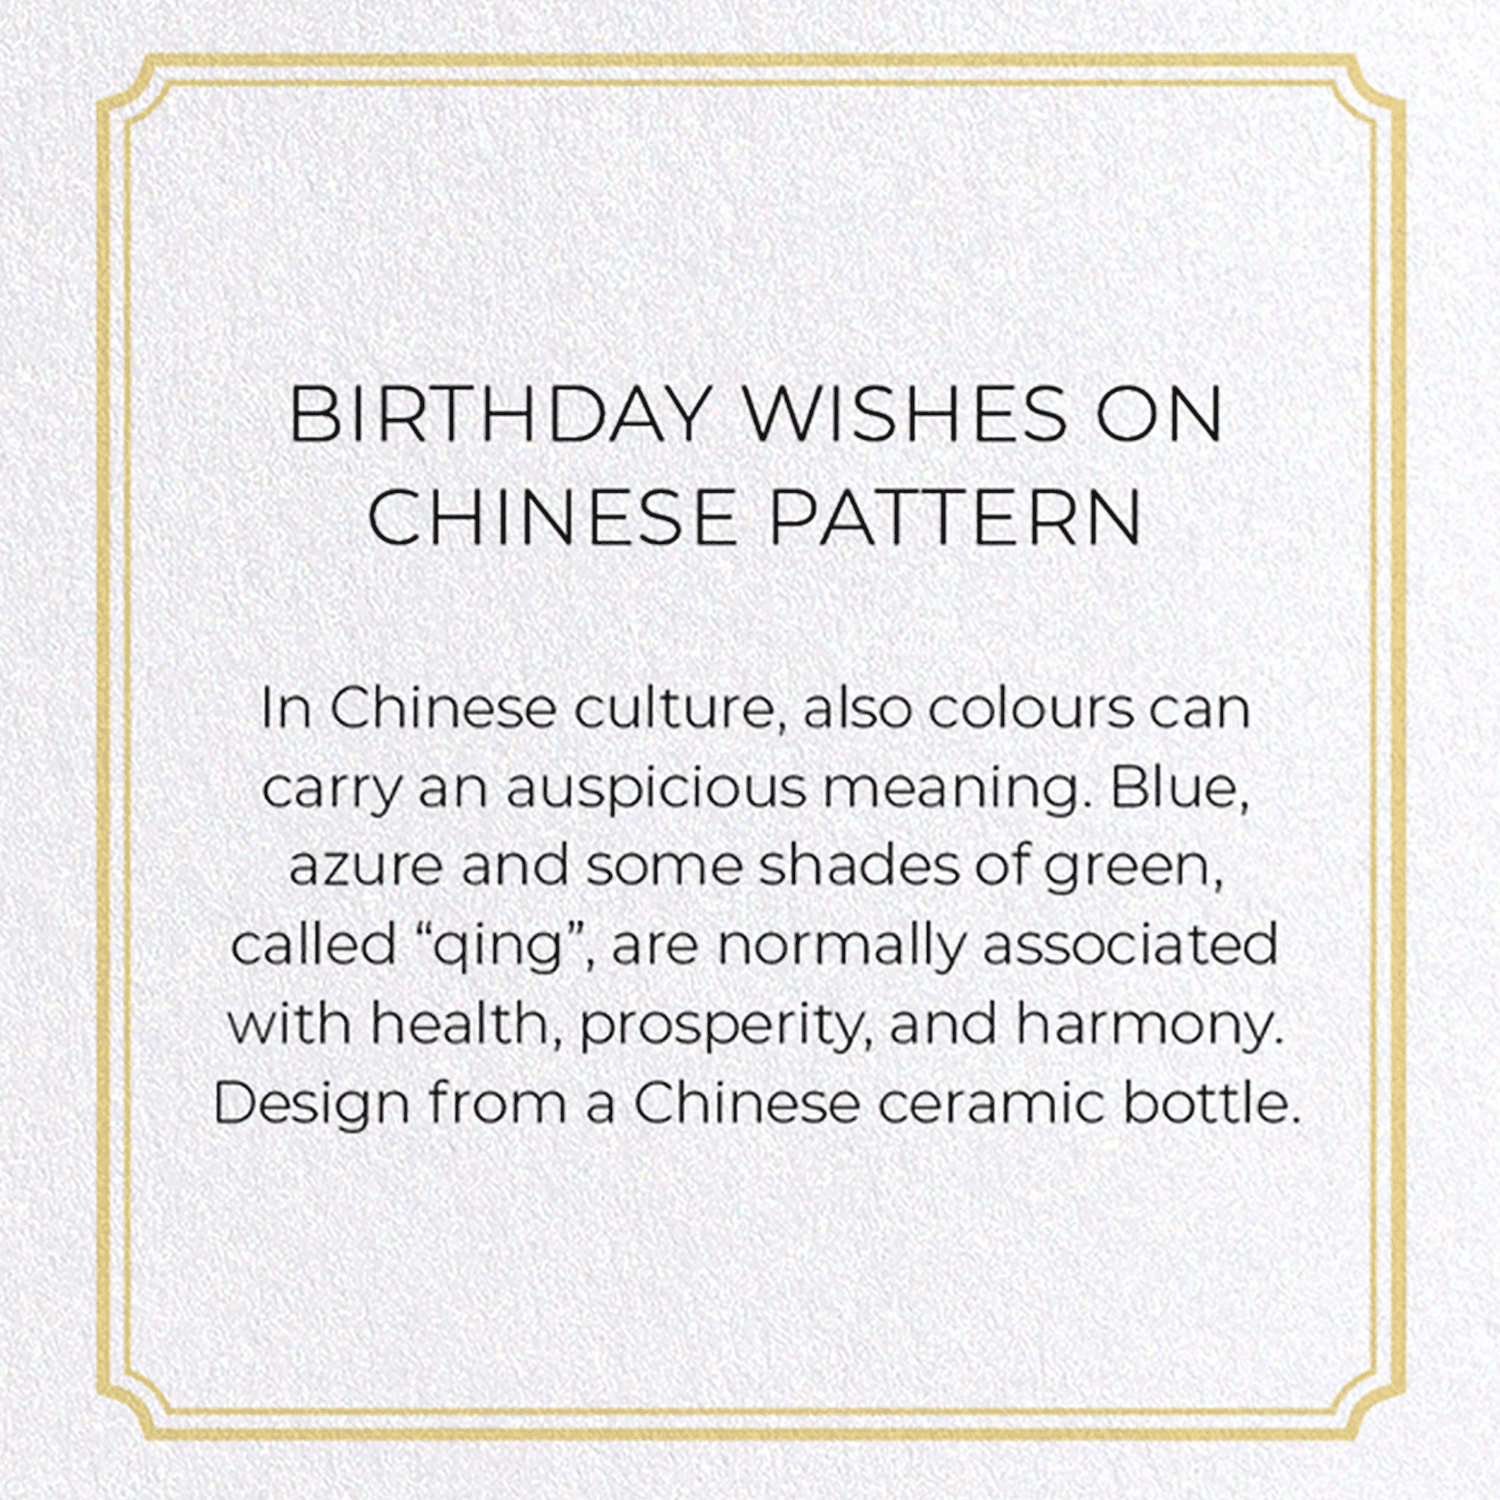 BIRTHDAY WISHES ON CHINESE PATTERN: Pattern Greeting Card